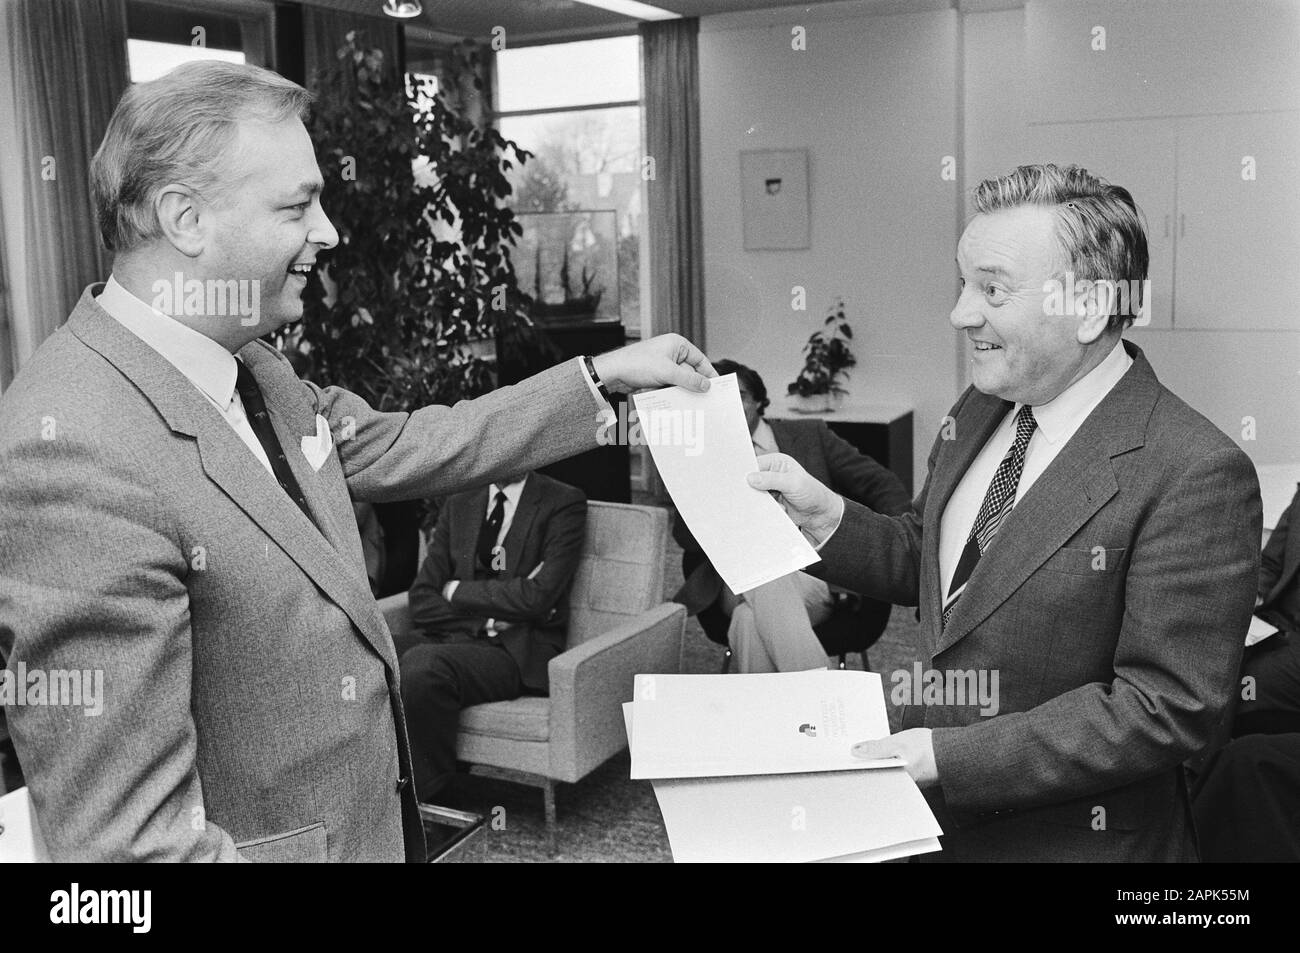 Mr. Landheer (chairman of the Association of Dutch Sickness Funds) hands the first own contribution card for medicines to state secretary Van der Reijden (WVC). Date: 31 January 1983 Keywords: wage and price policy, social services Personal name: Reijden, Joop van der Stock Photo